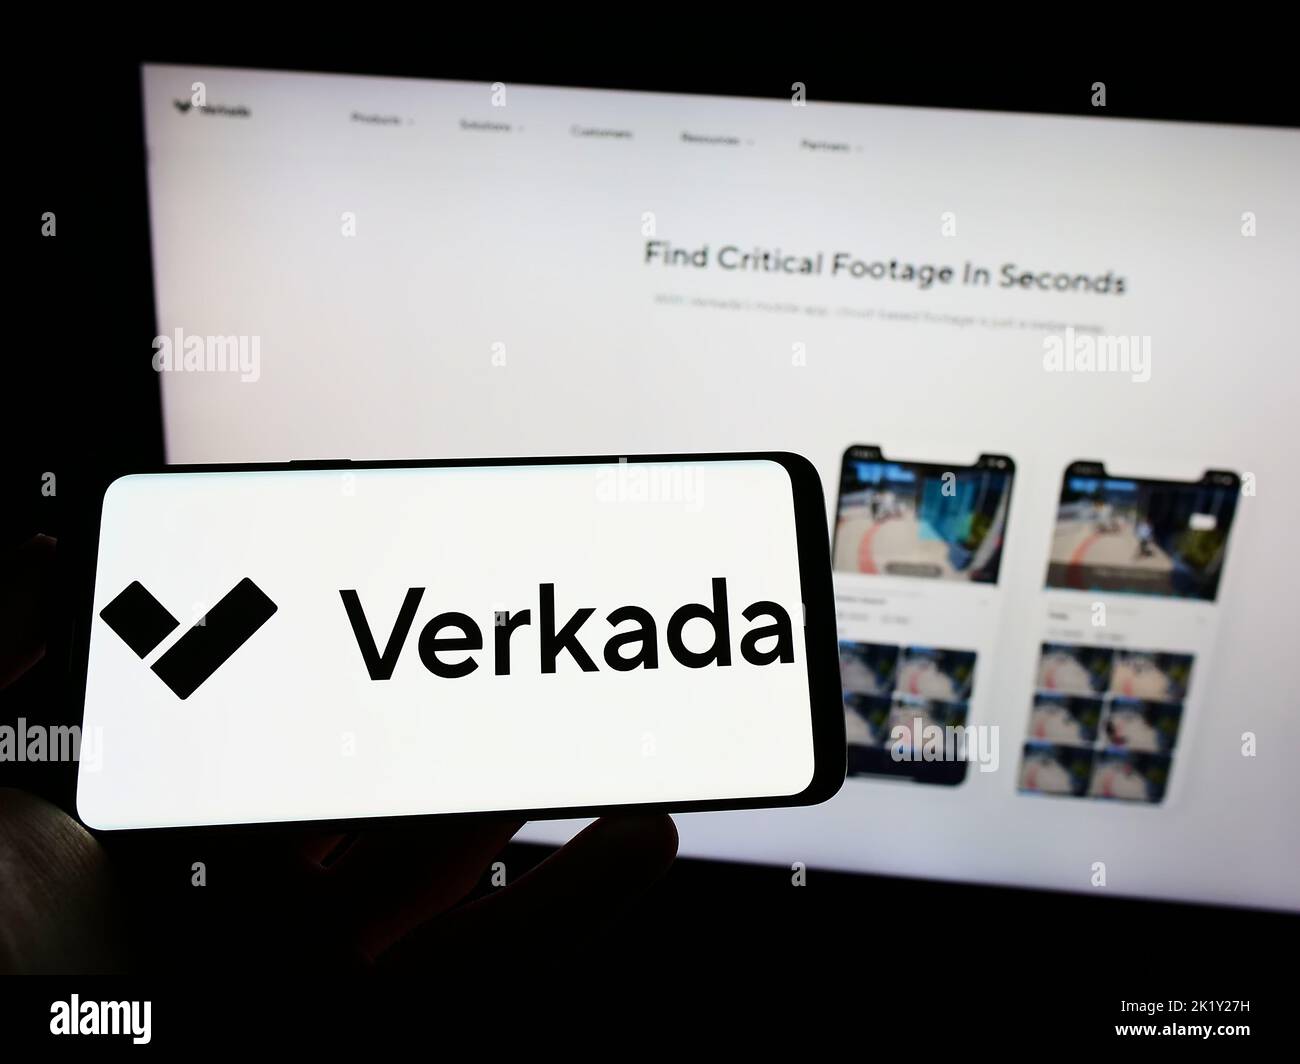 Person holding cellphone with logo of US security systems company Verkada Inc. on screen in front of business webpage. Focus on phone display. Stock Photo